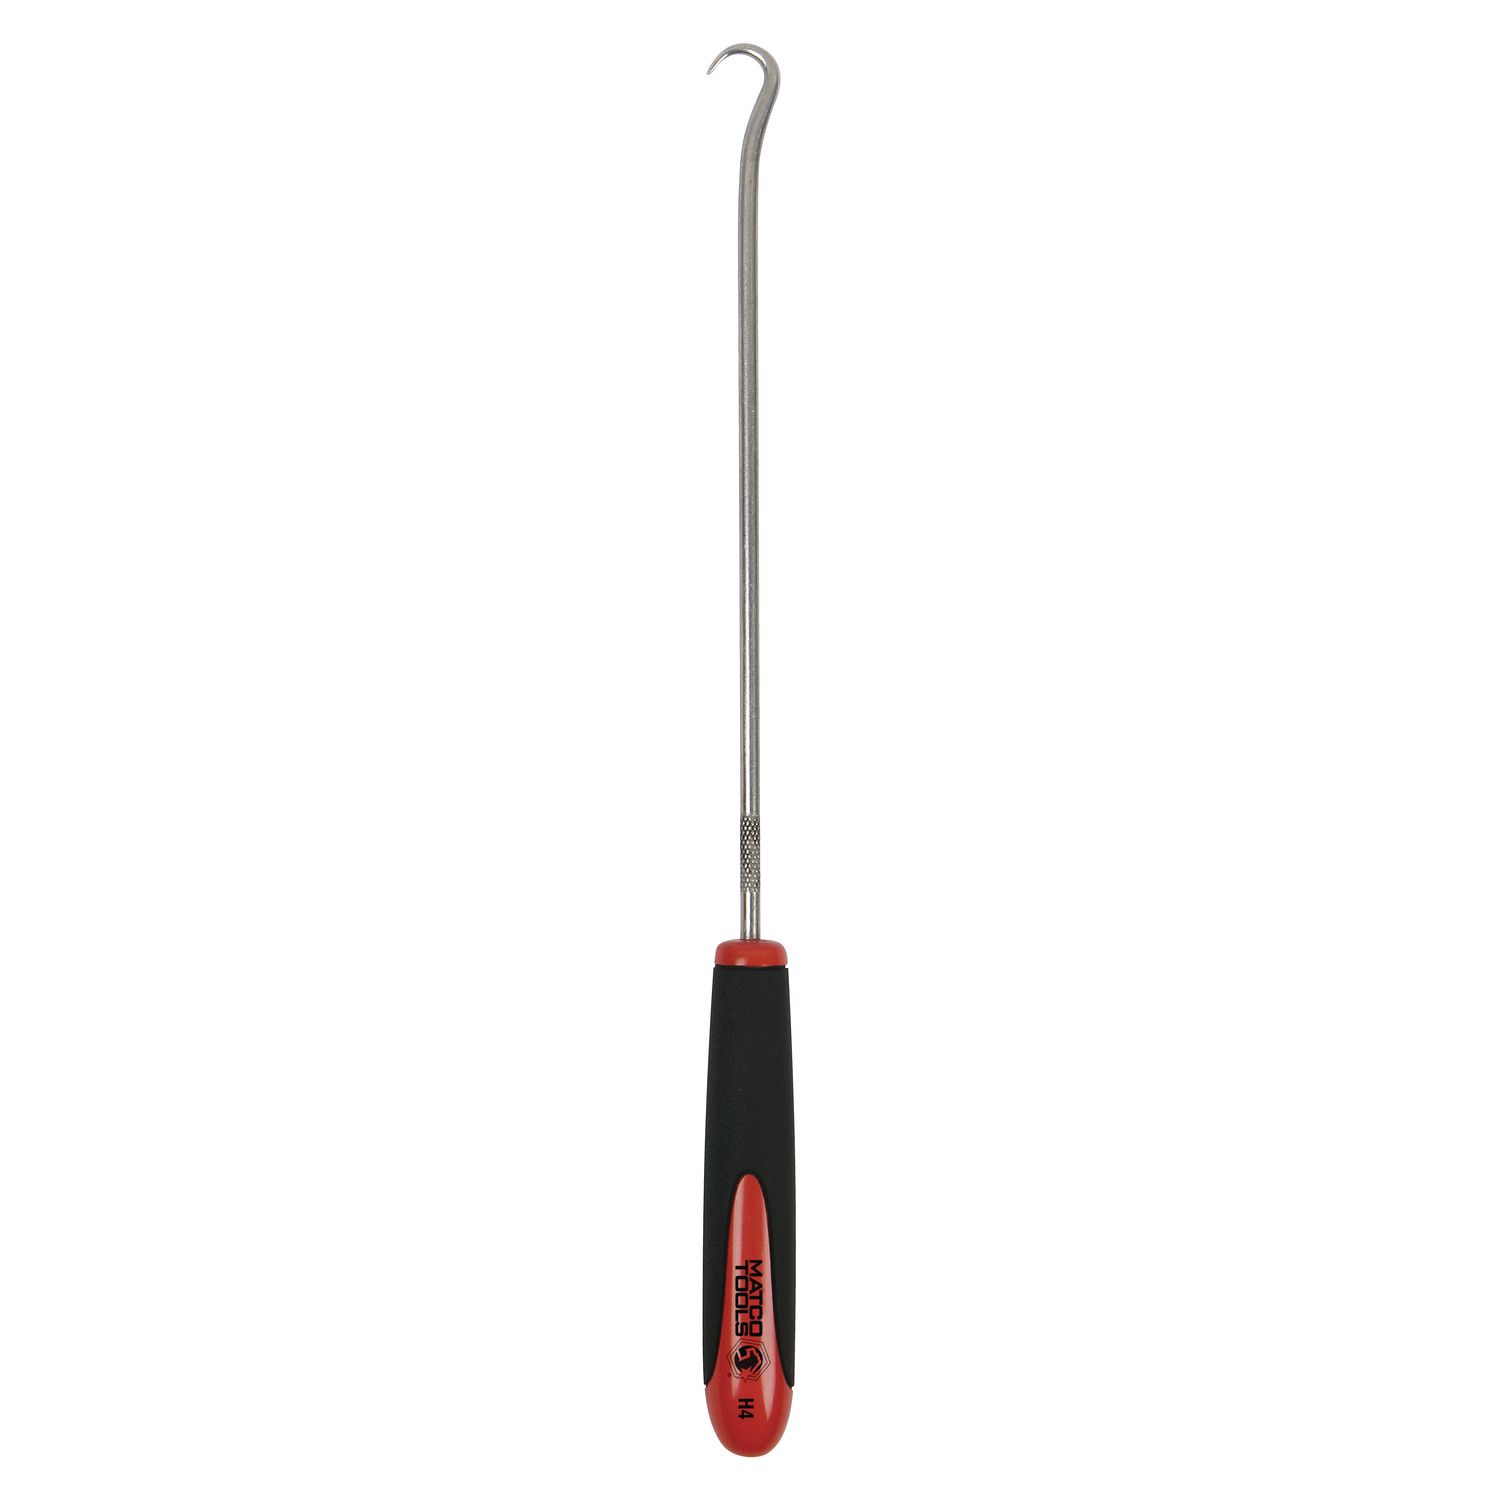 ULCHP6L 6 Piece Long Hook and Pick Set - Wise Auto Tools LLC